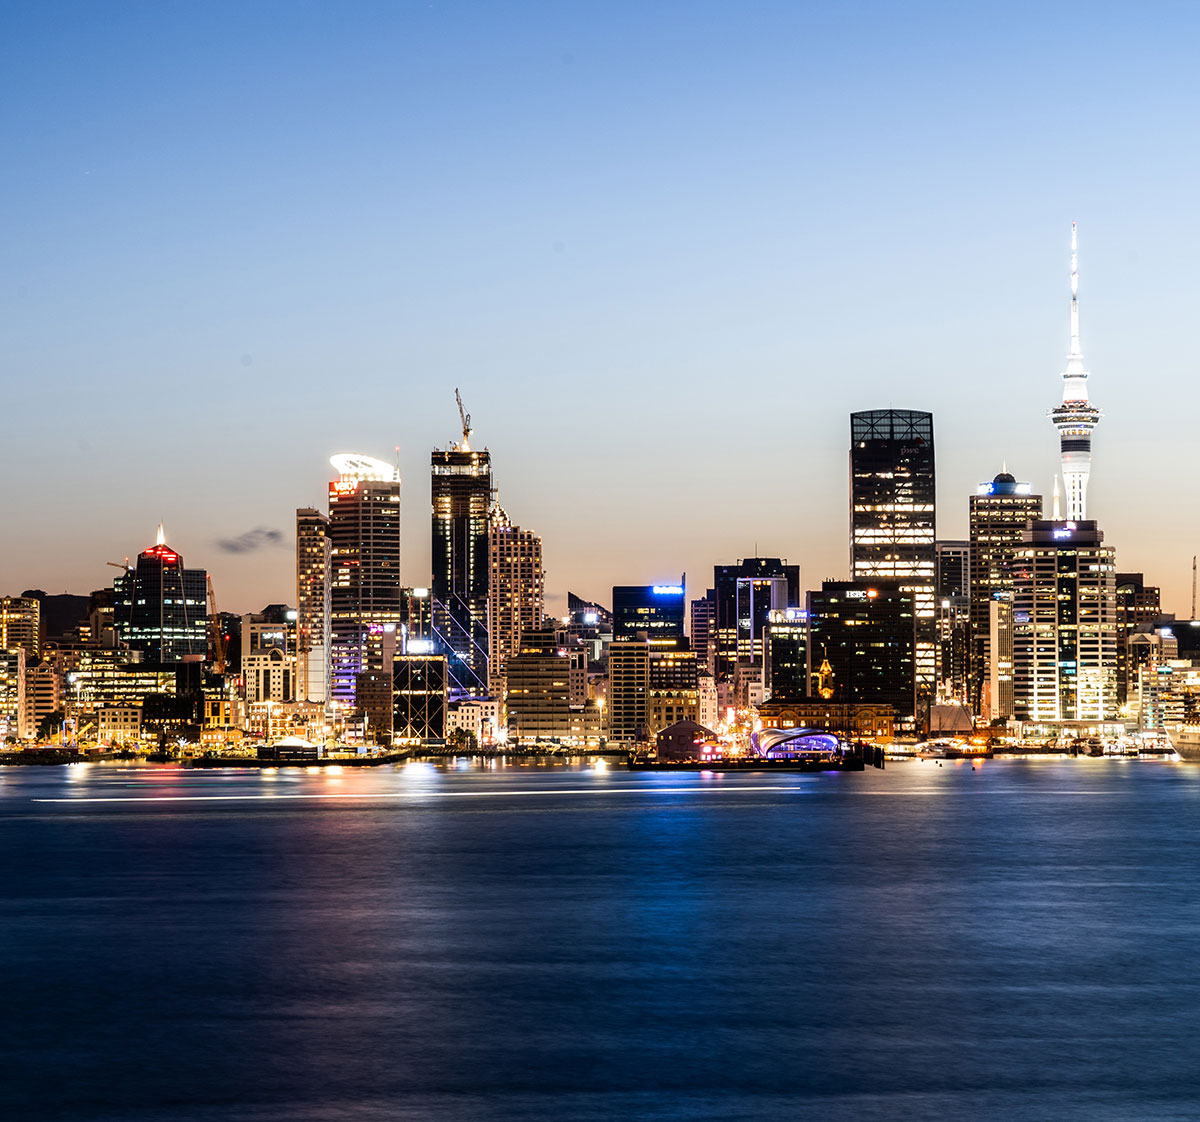 The Auckland city skyline seen from across the water at night.